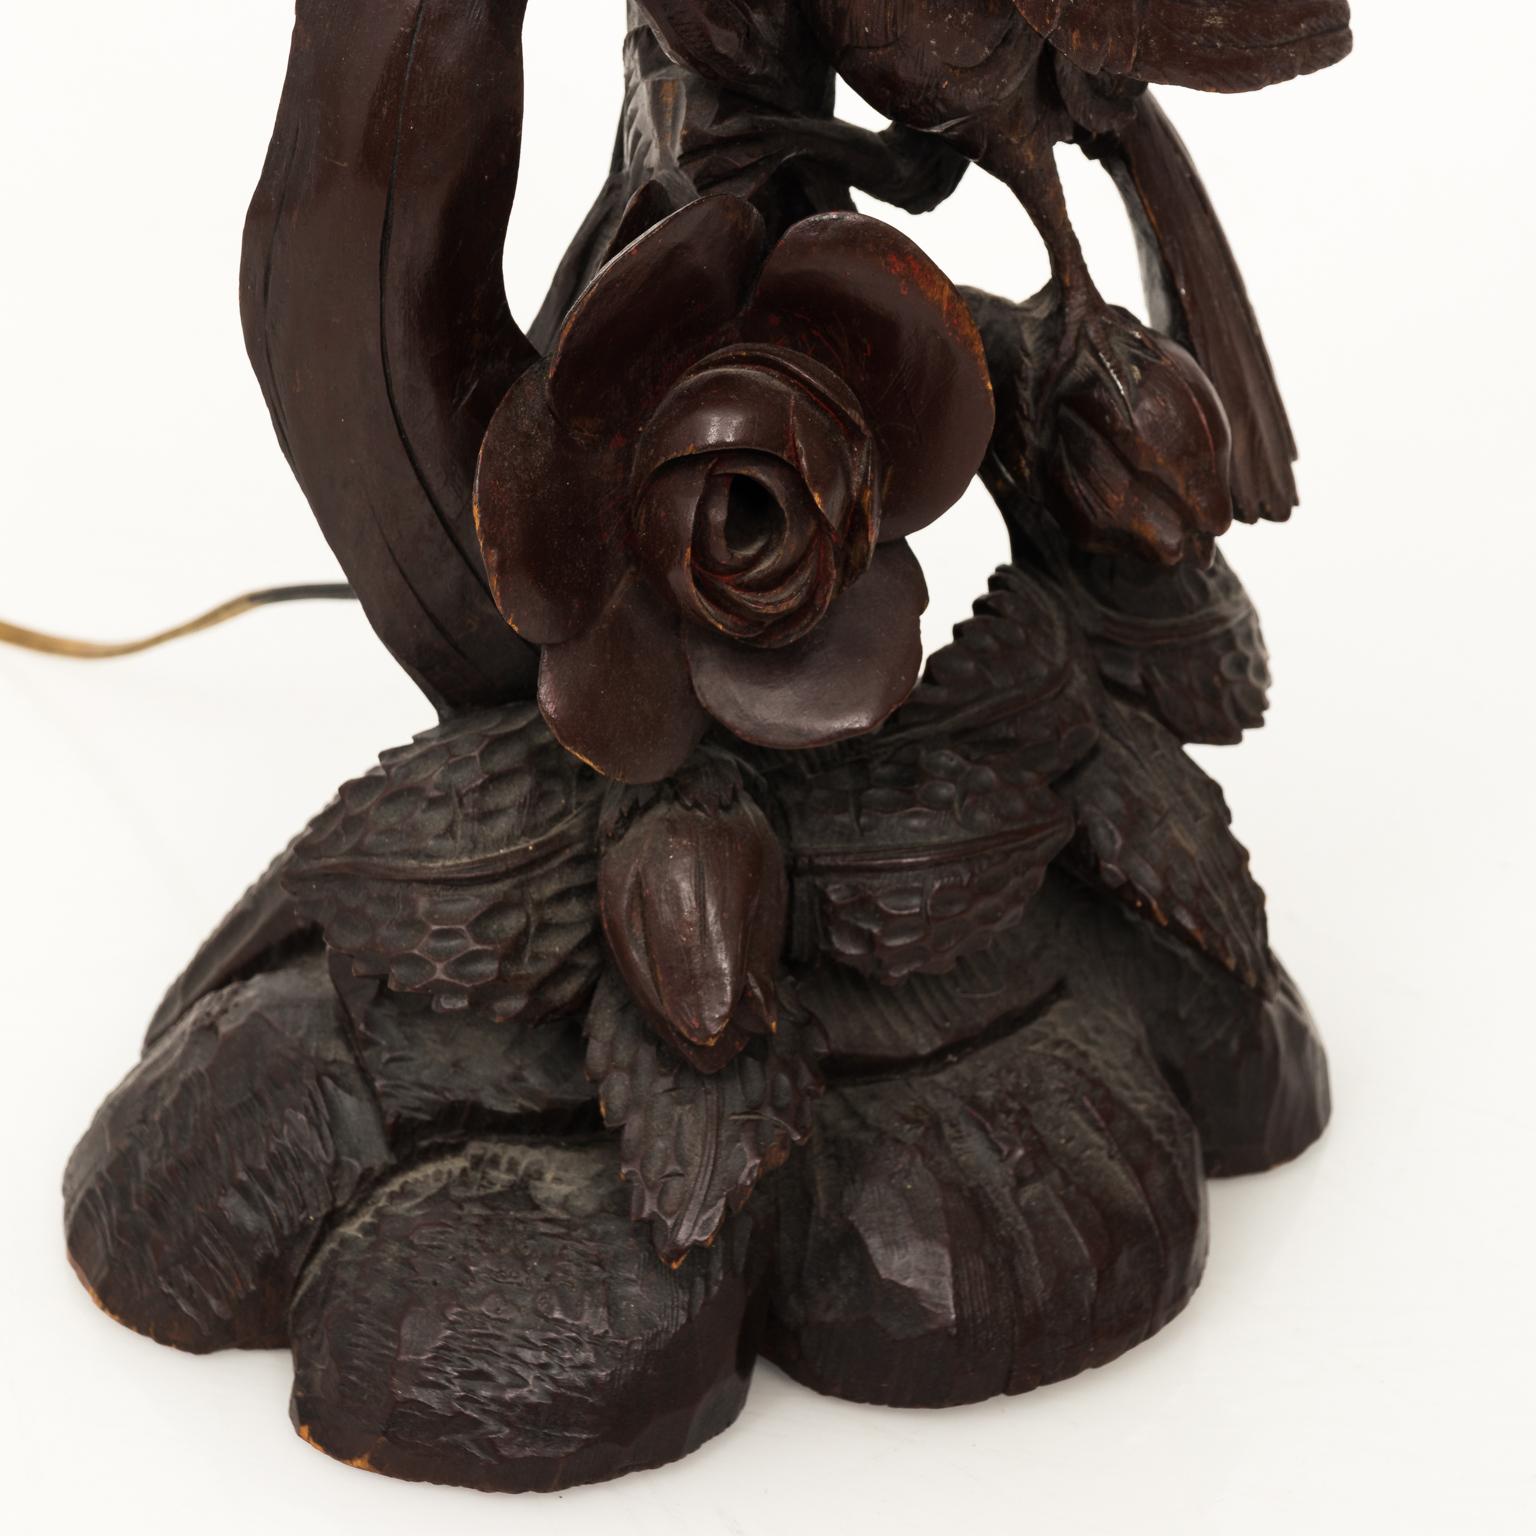 German Black Forrest carved hardwood lamp with birds perched in a floral setting, circa 1880-1890. Matching shade is included.
 